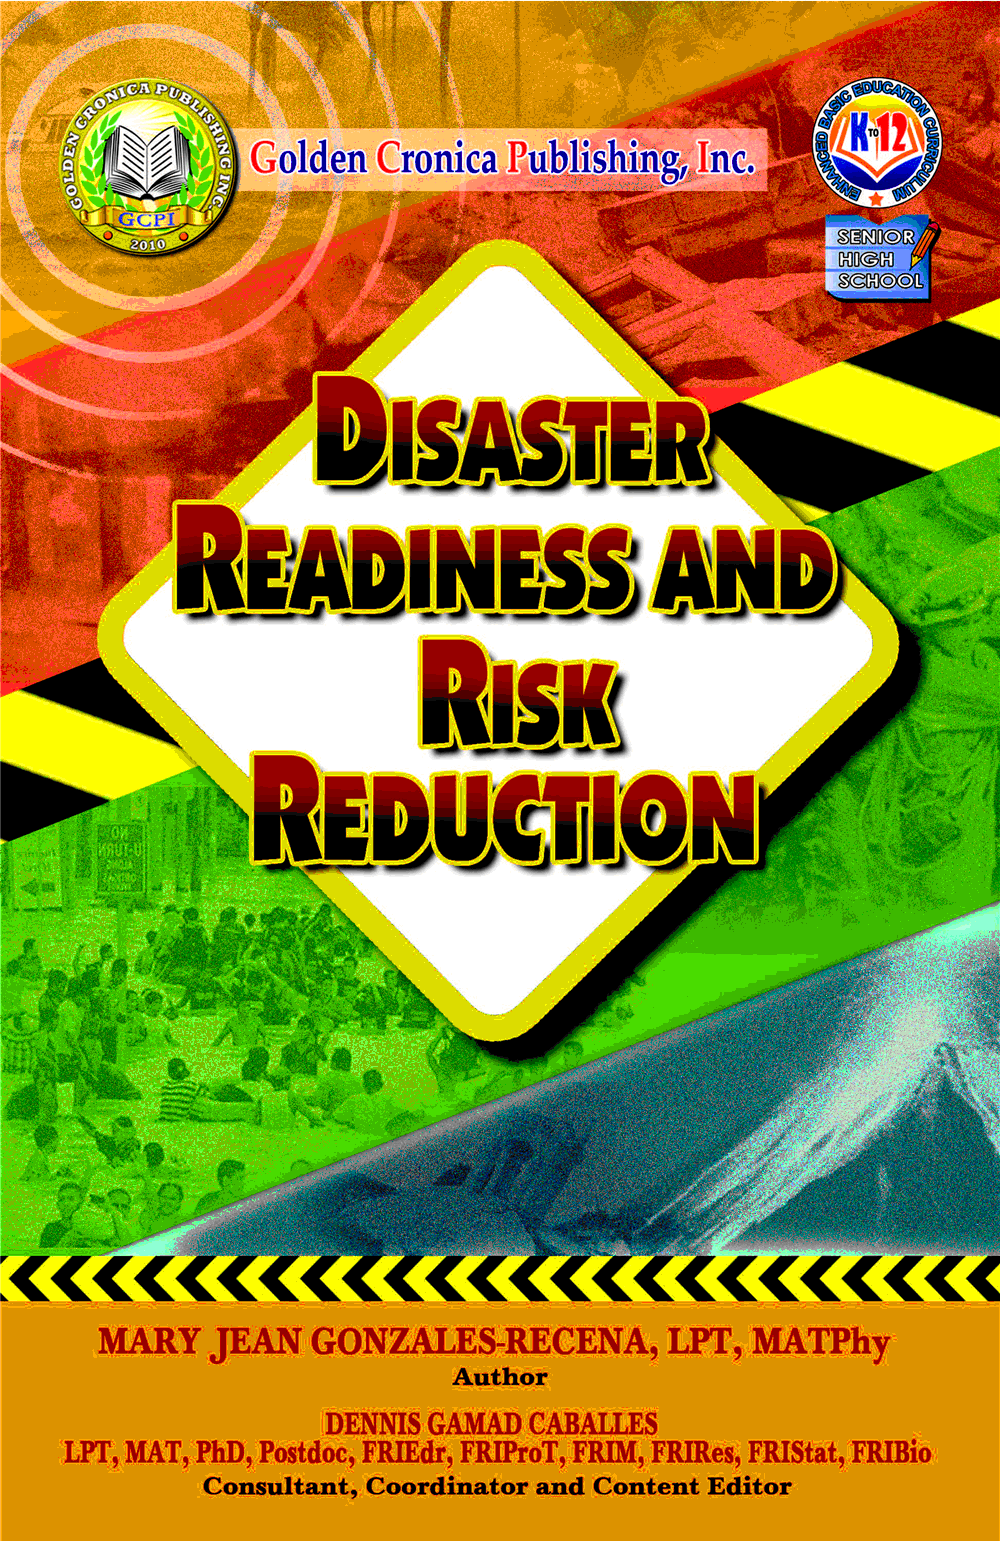 [EB_SHS-DIS] Disaster Readiness and Risk Reduction - (EBOOK)